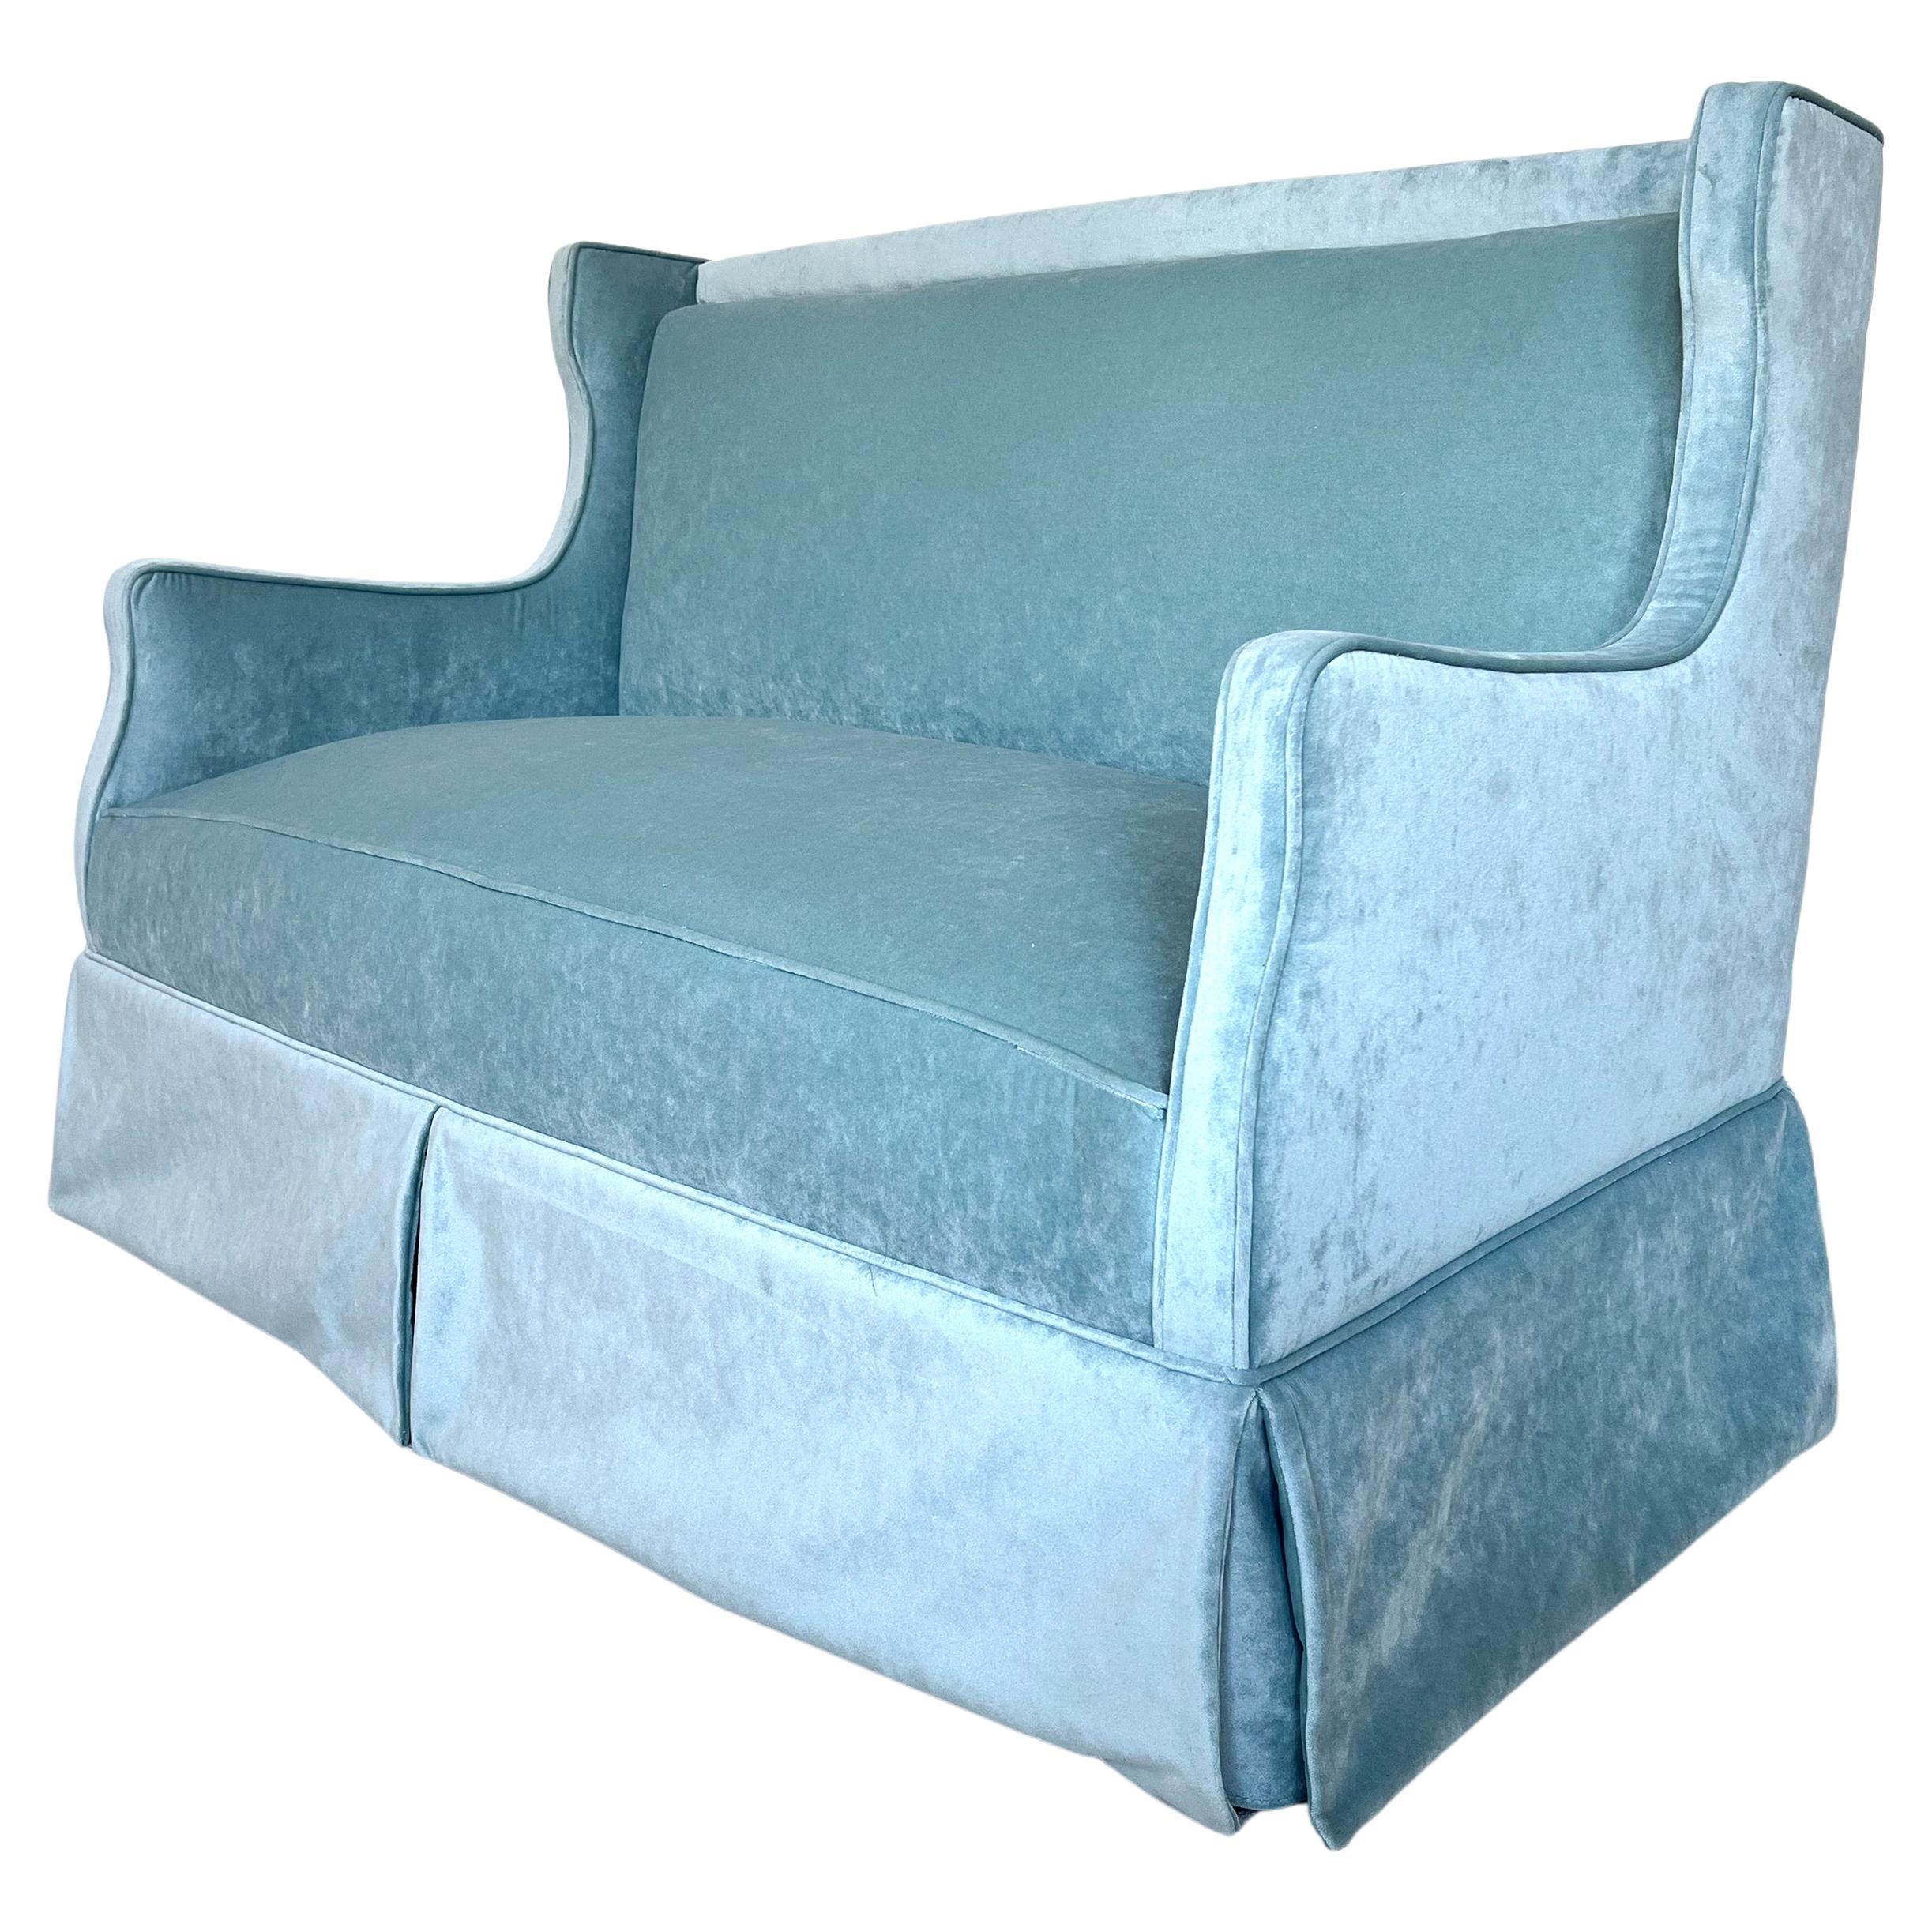 English Art Deco Small Two Seat Sofa C.1930

Of neat proportions, having been recently upholstered in a duck egg blue cotton velvet.
England, C.1930
 
L140cm
D67cm
H89cm